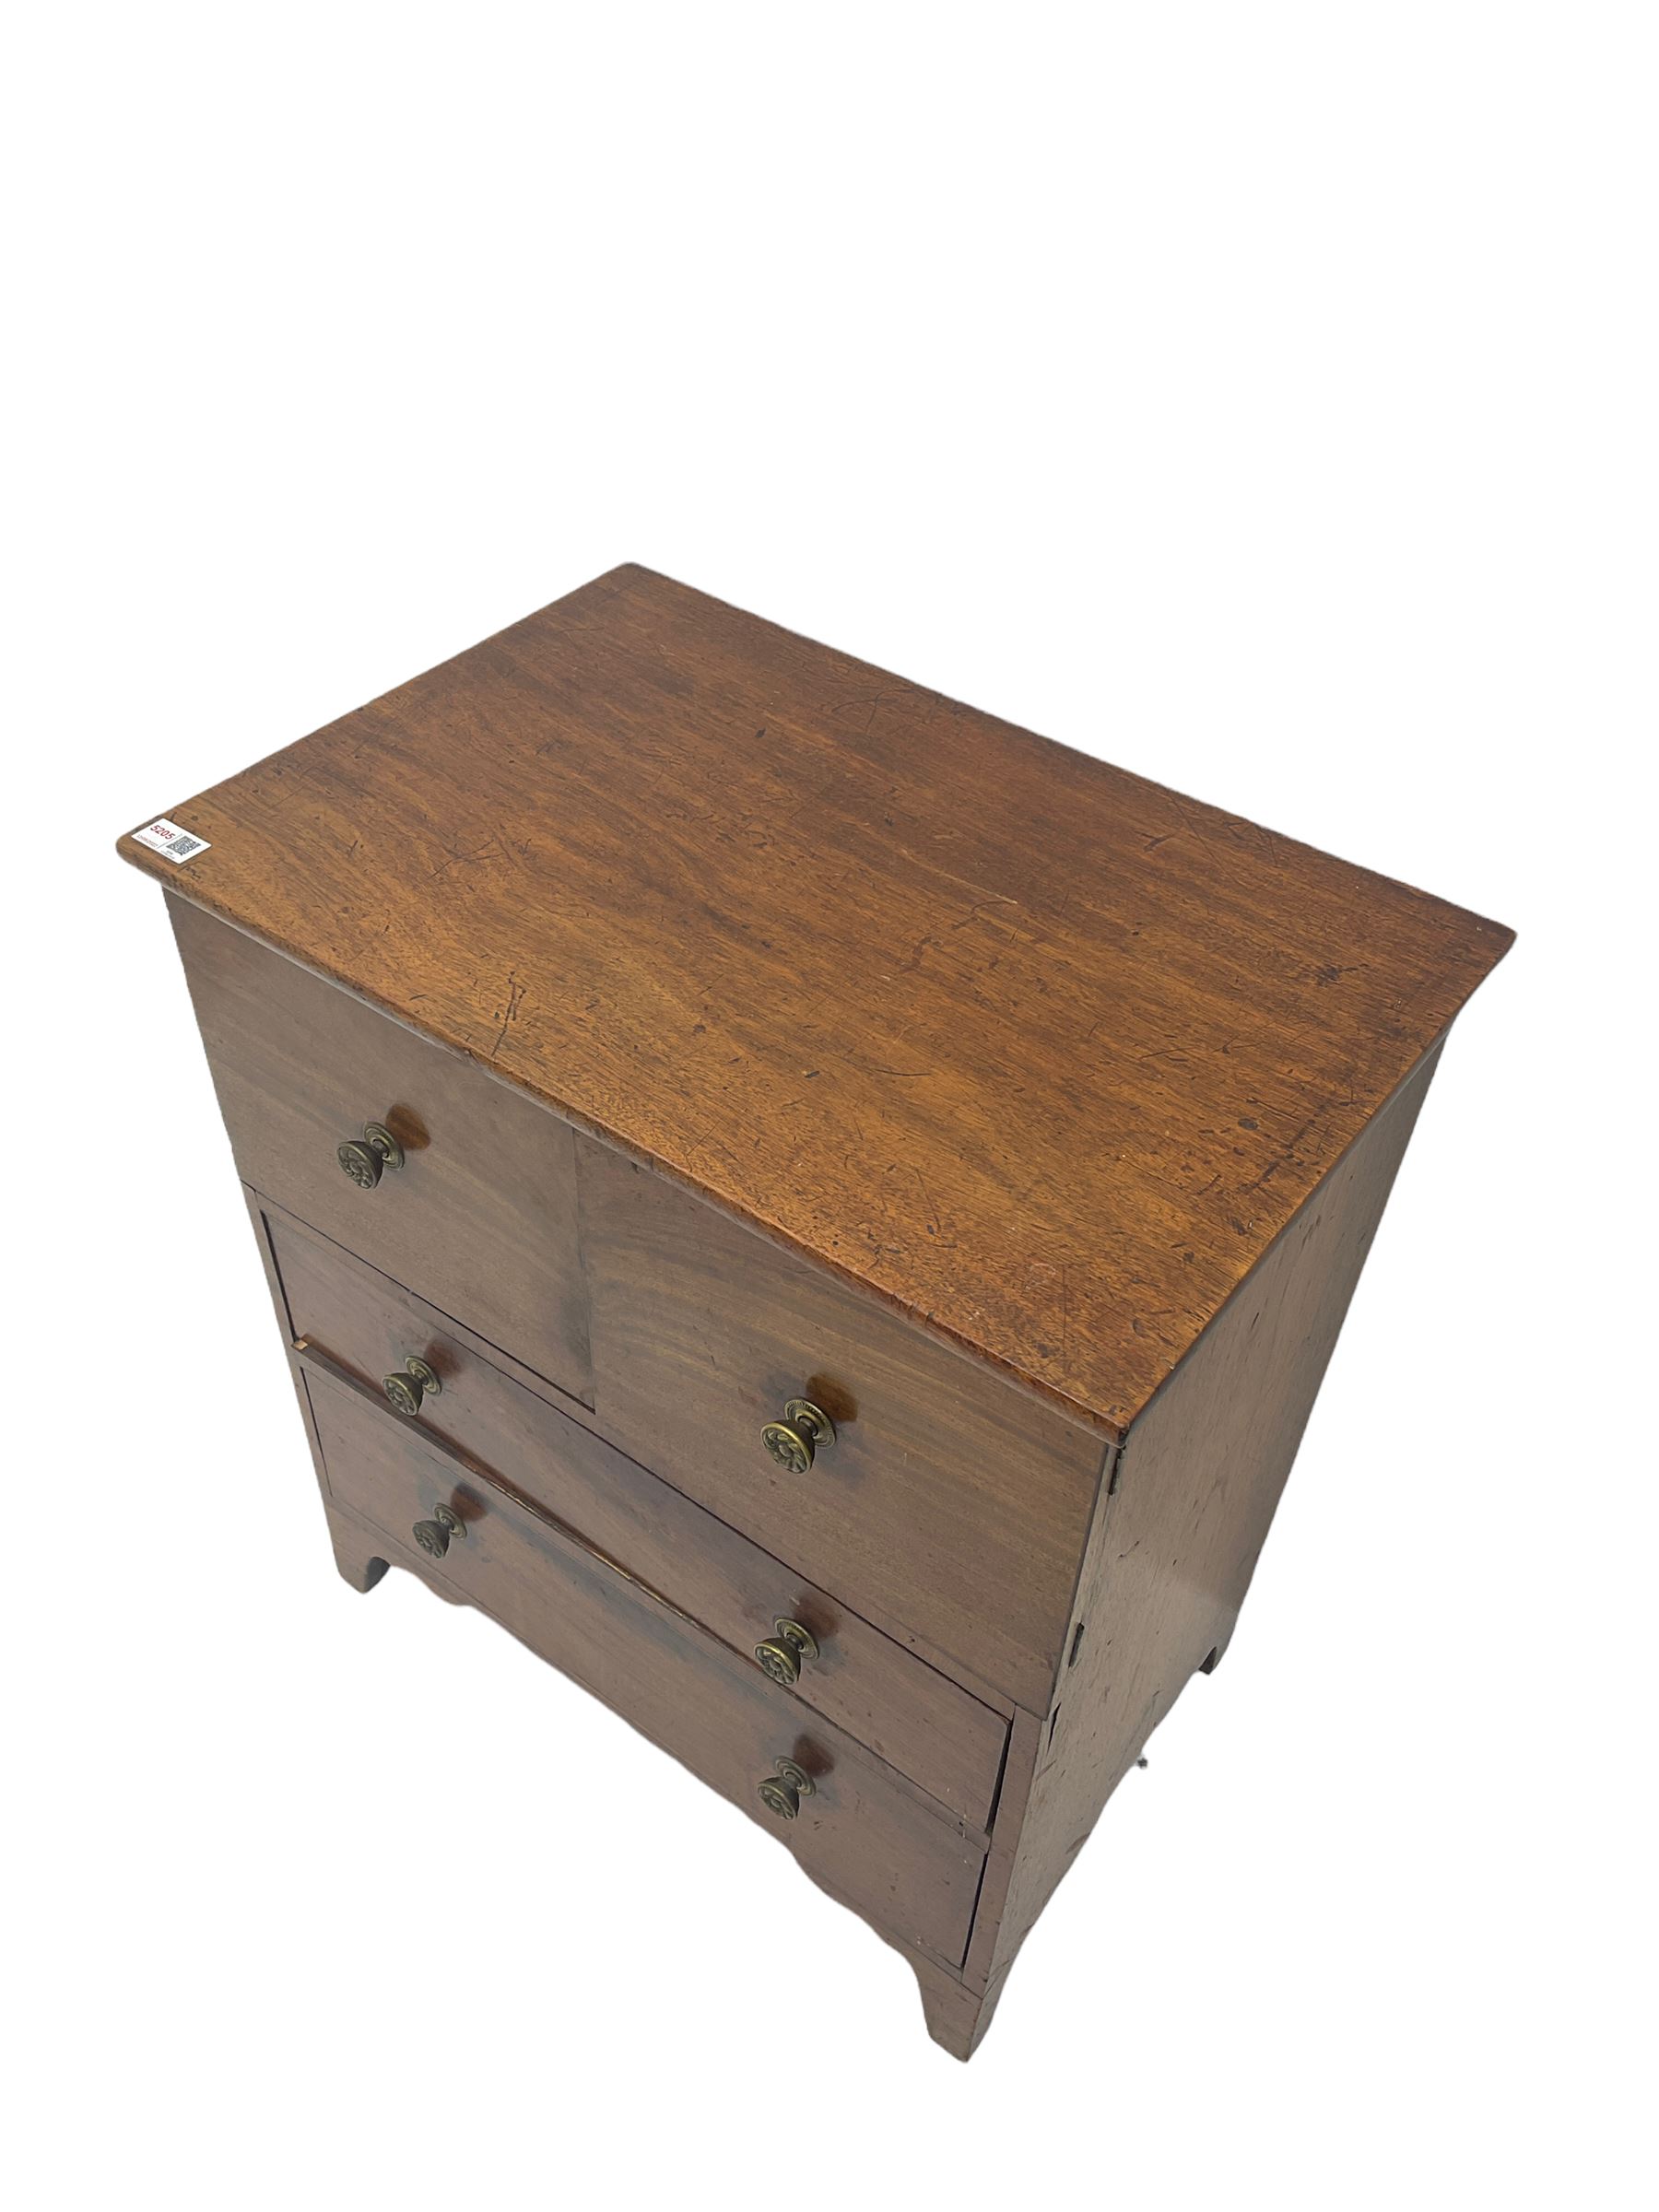 19th century mahogany commode cabinet or nightstand - Image 2 of 2